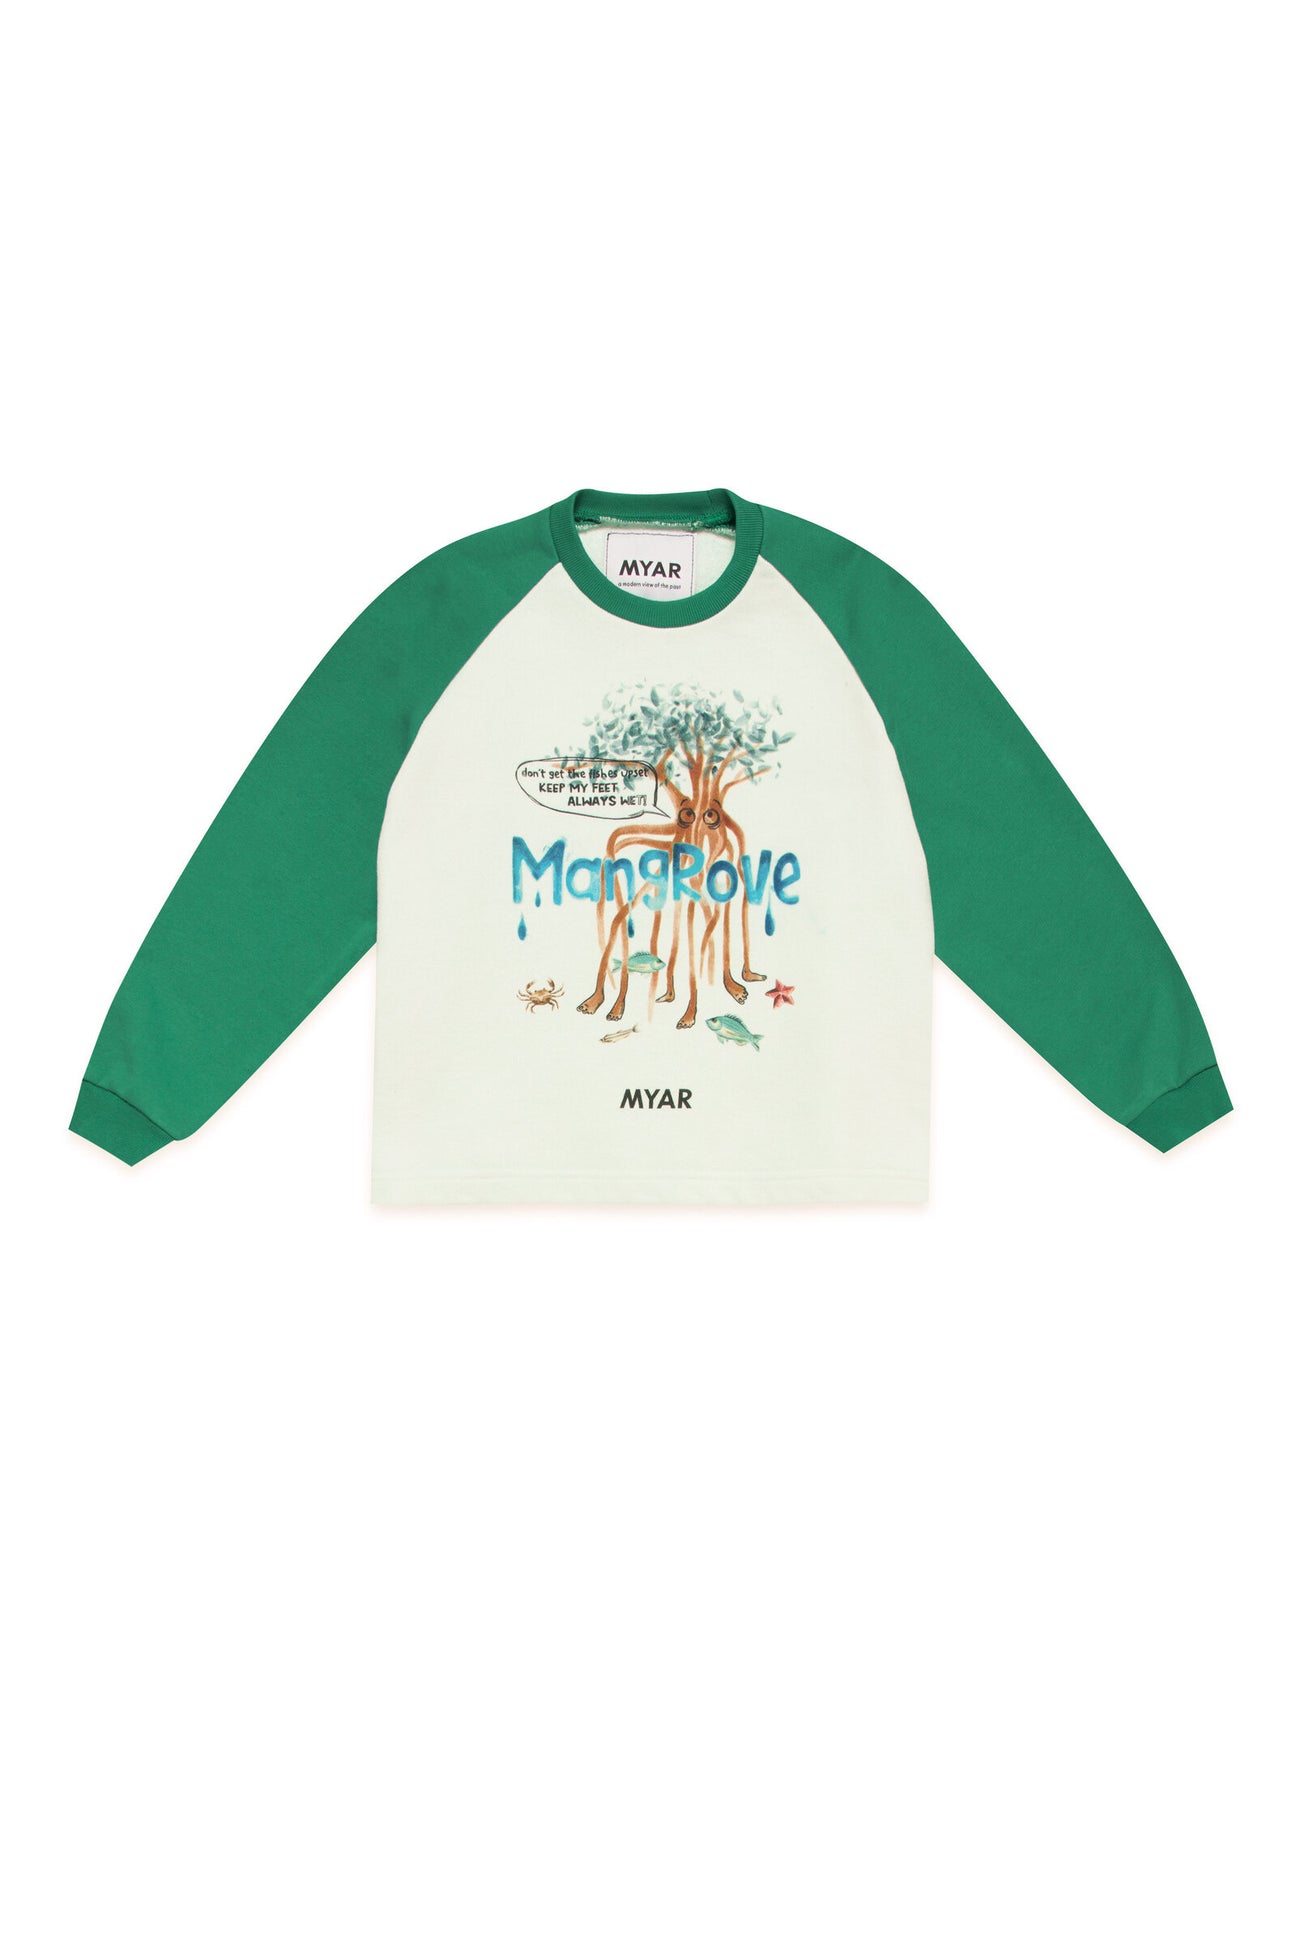 Deadstock white and green crewneck sweatshirt with digital Mangrove print Deadstock white and green crewneck sweatshirt with digital Mangrove print